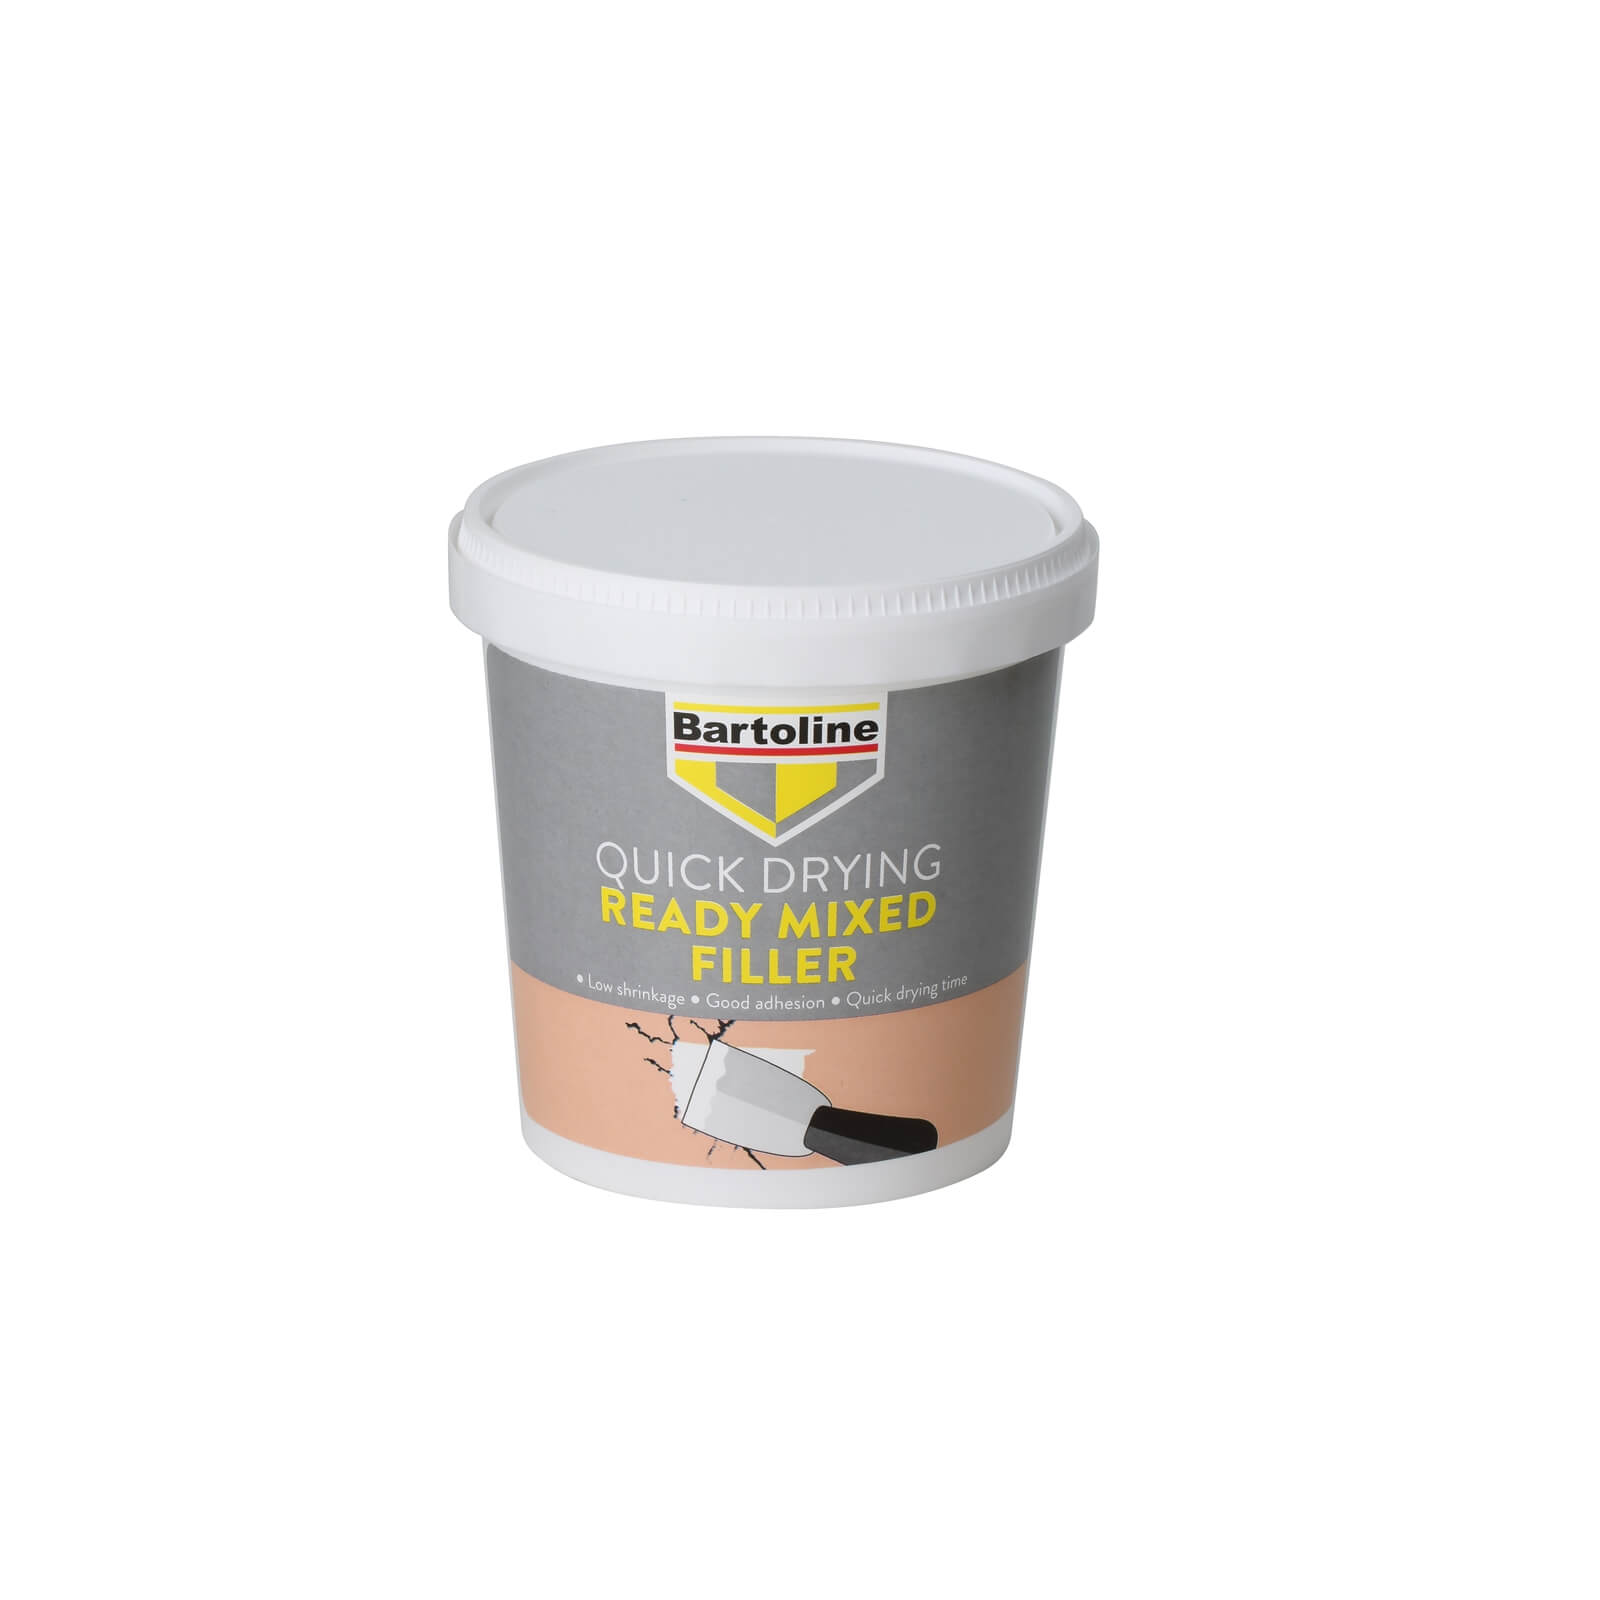 Bartoline Quick Drying Ready Mixed Filler - 1Kg